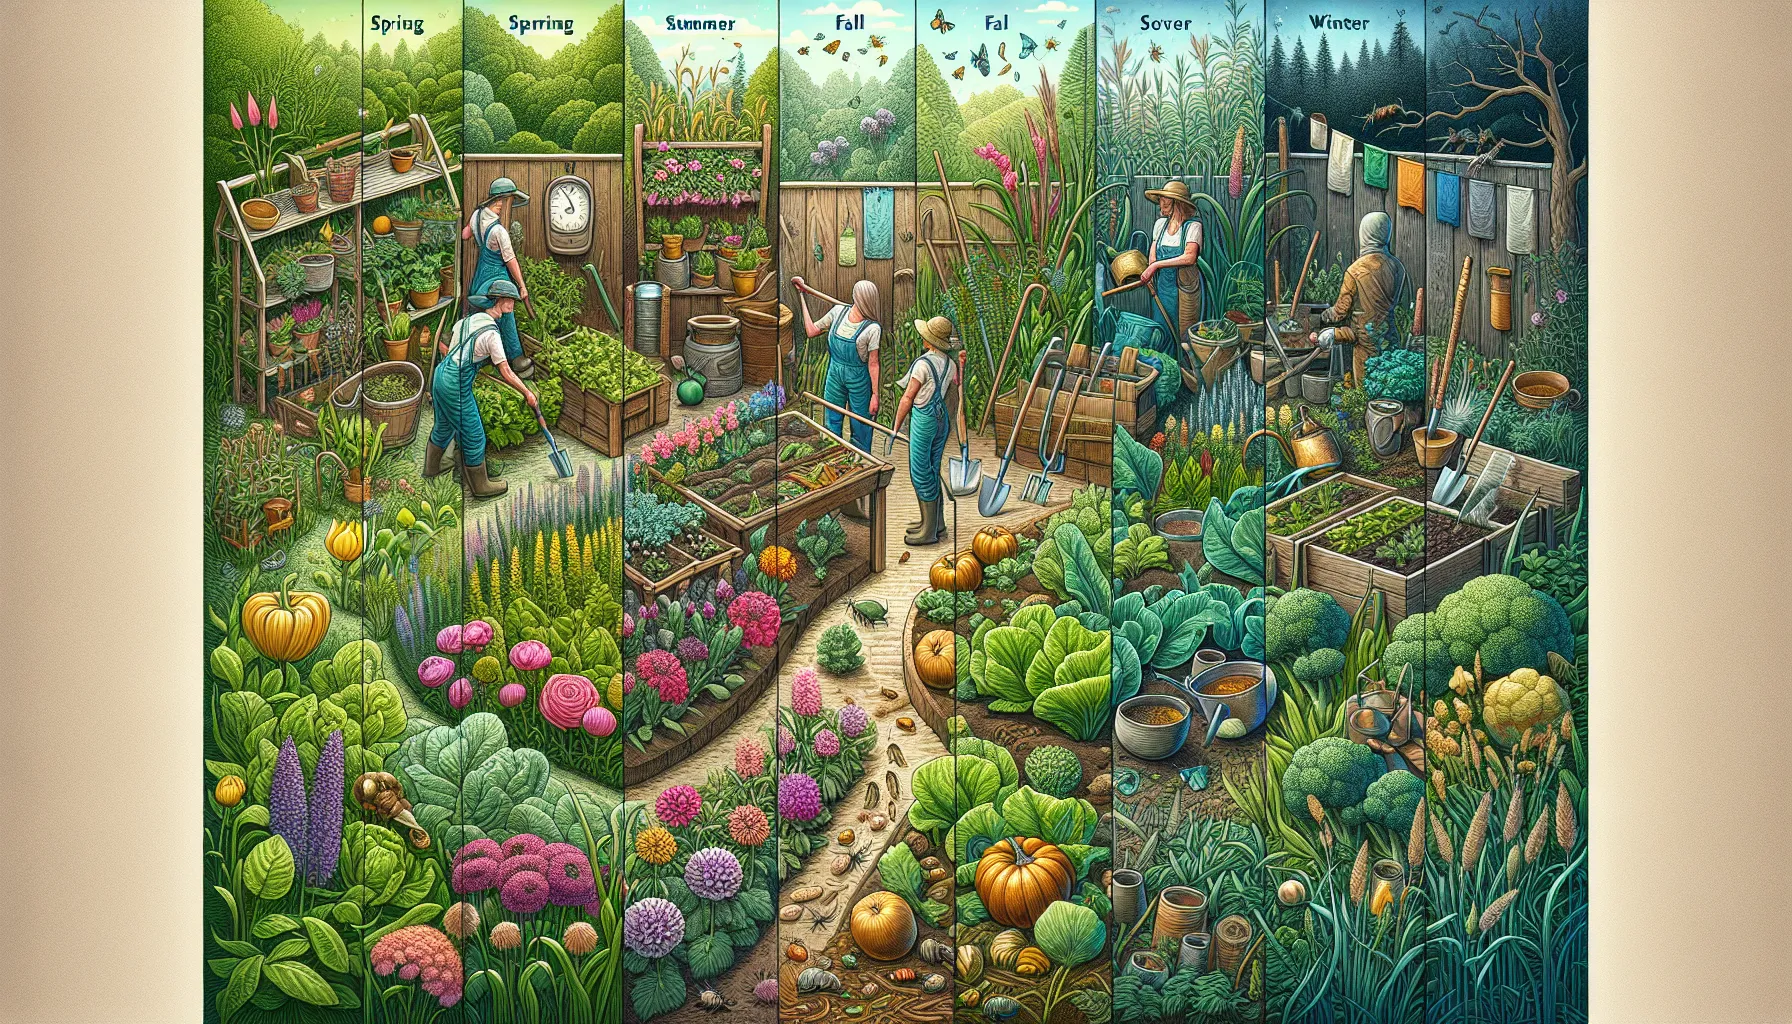 A detailed illustration depicting the seasonal progress of garden care, featuring a gardener tending to vibrant plants from spring to winter.